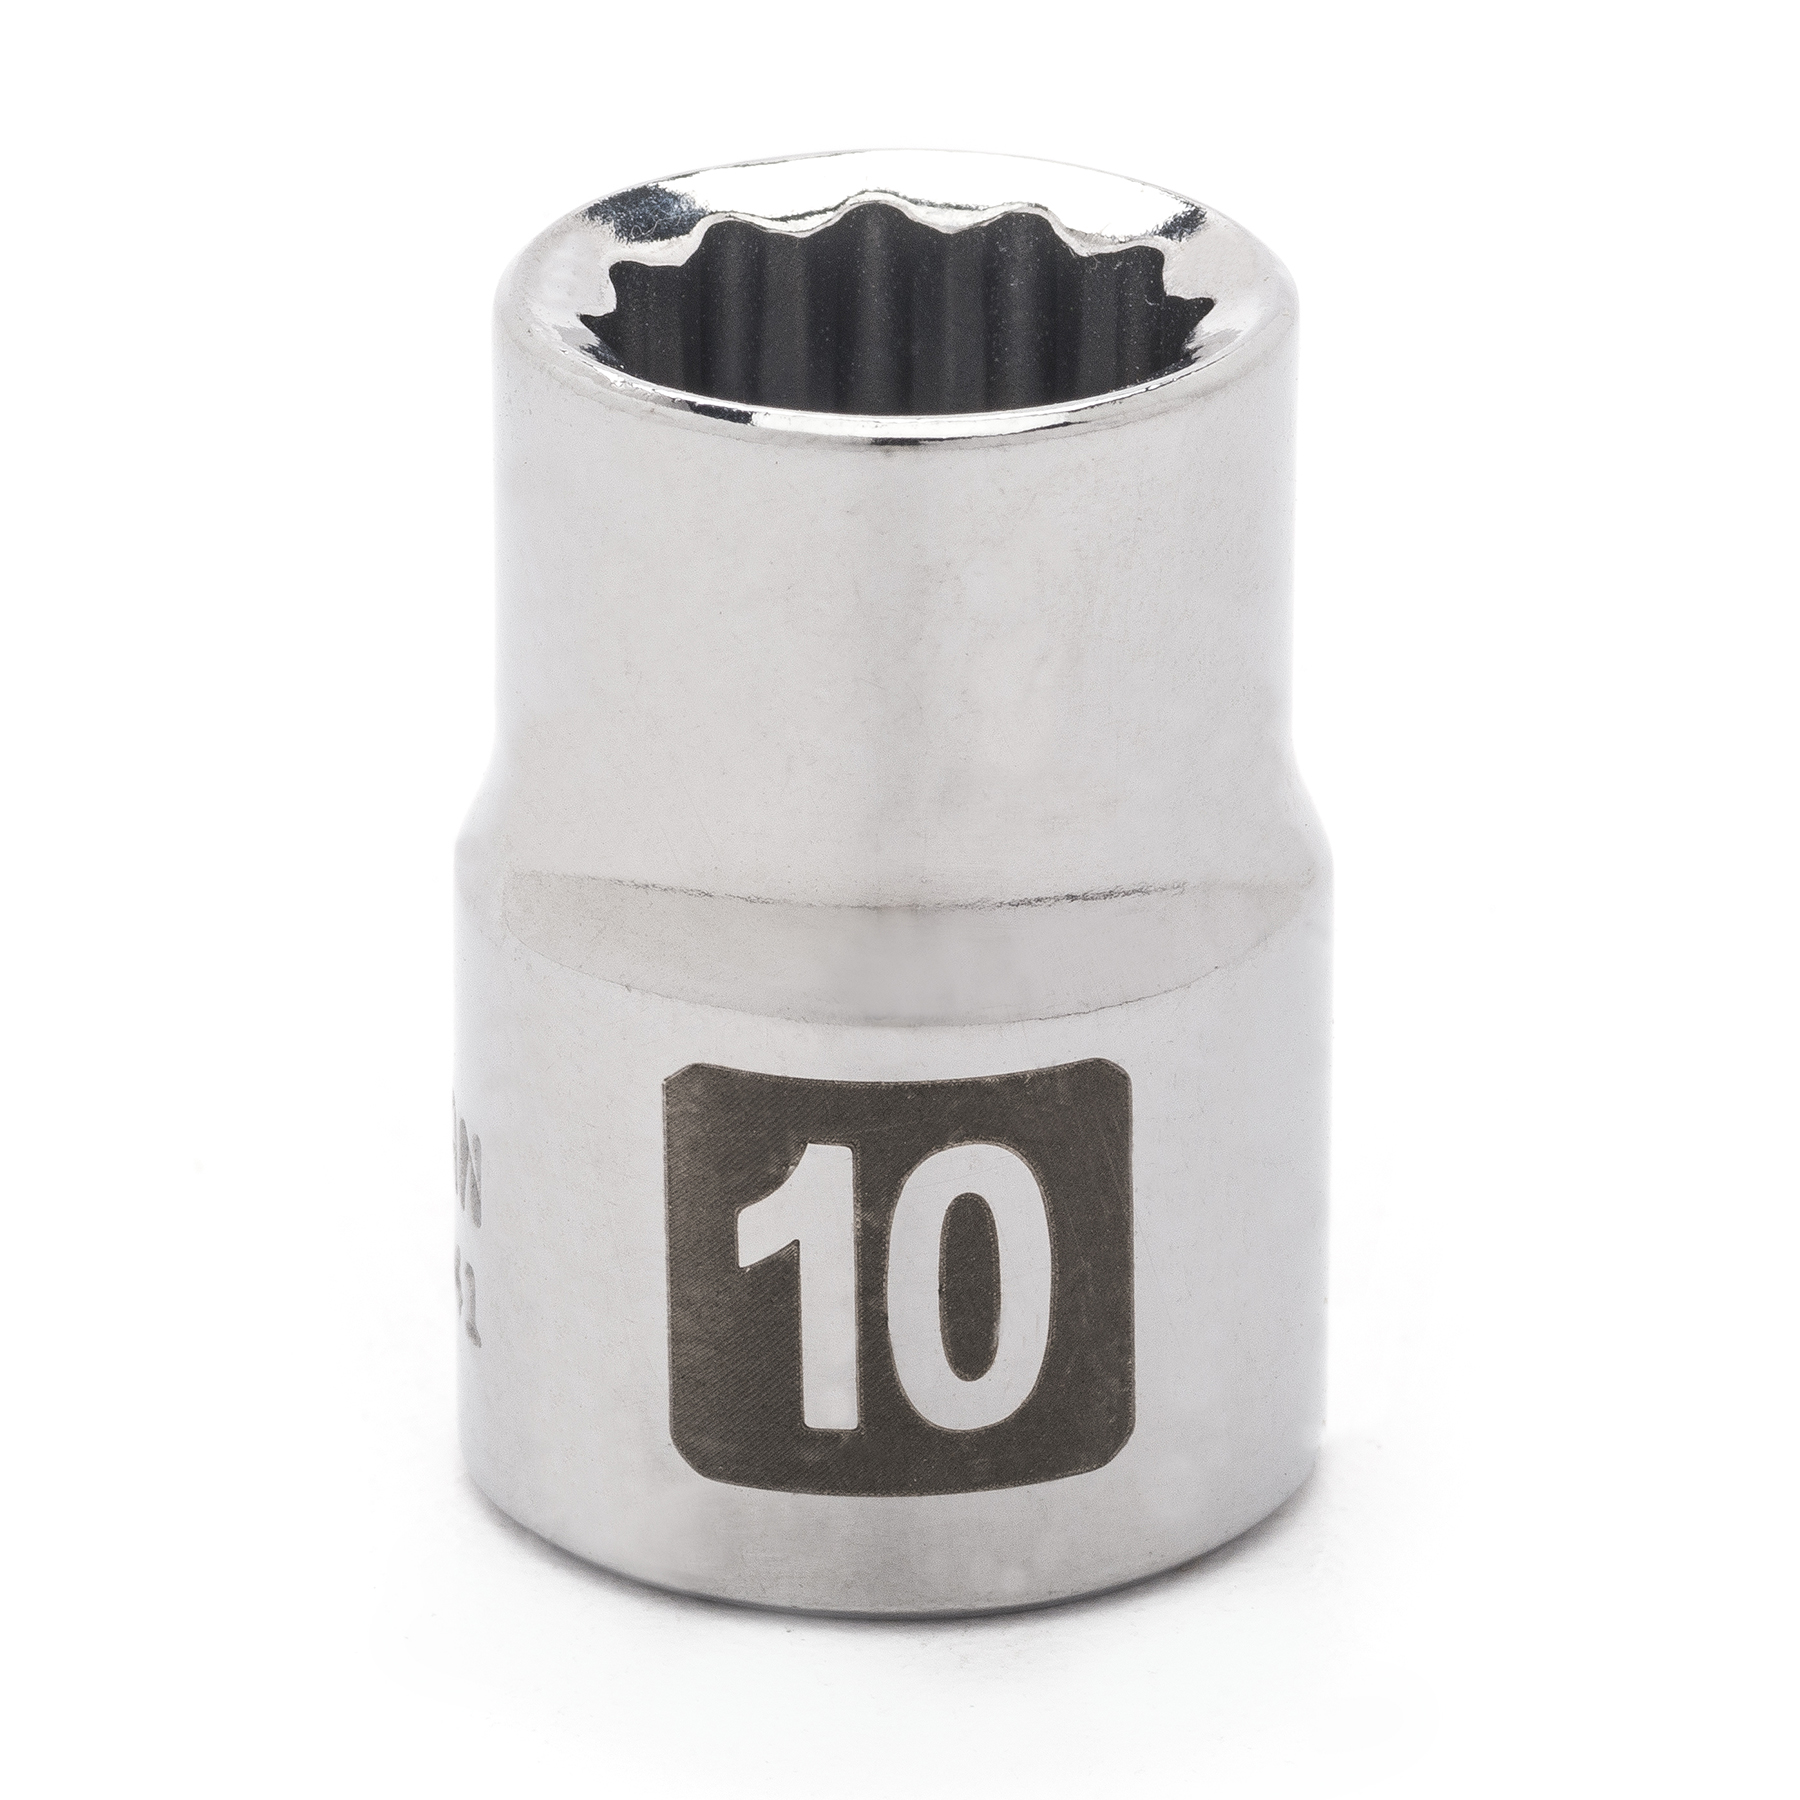 Craftsman 10mm 12 pt. 3/8" Drive Easy-To-Read Socket